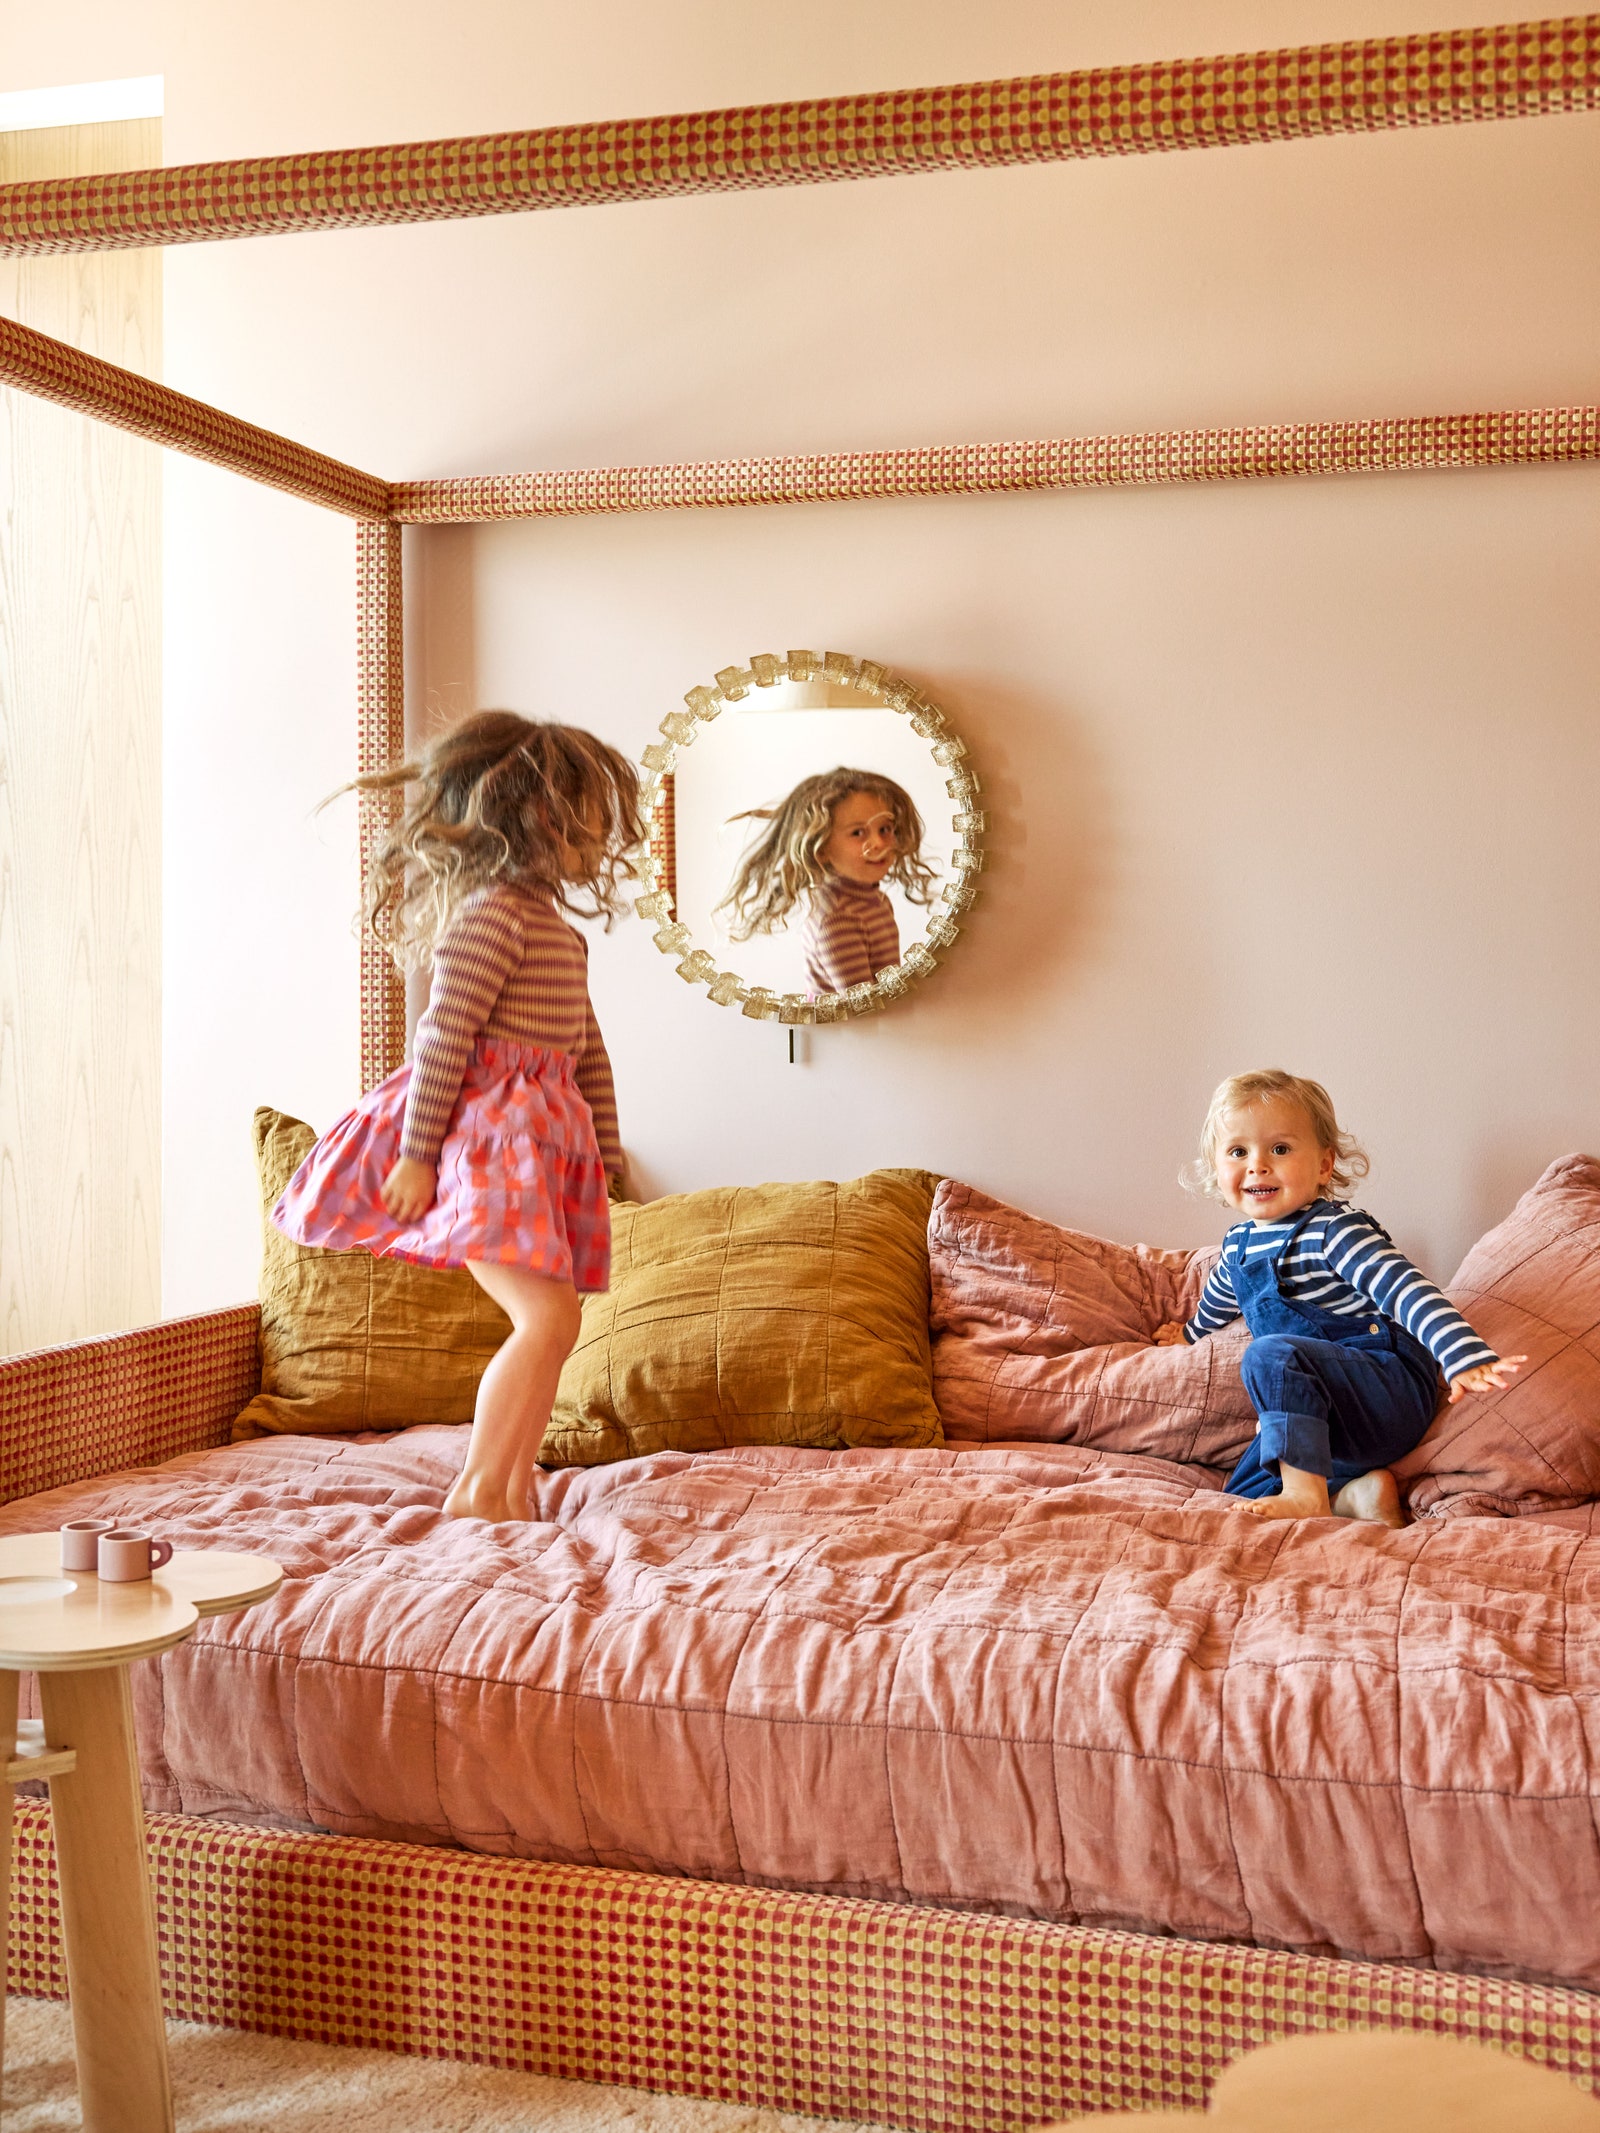 Two young children bouncing on a pink bed small round mirror on wall